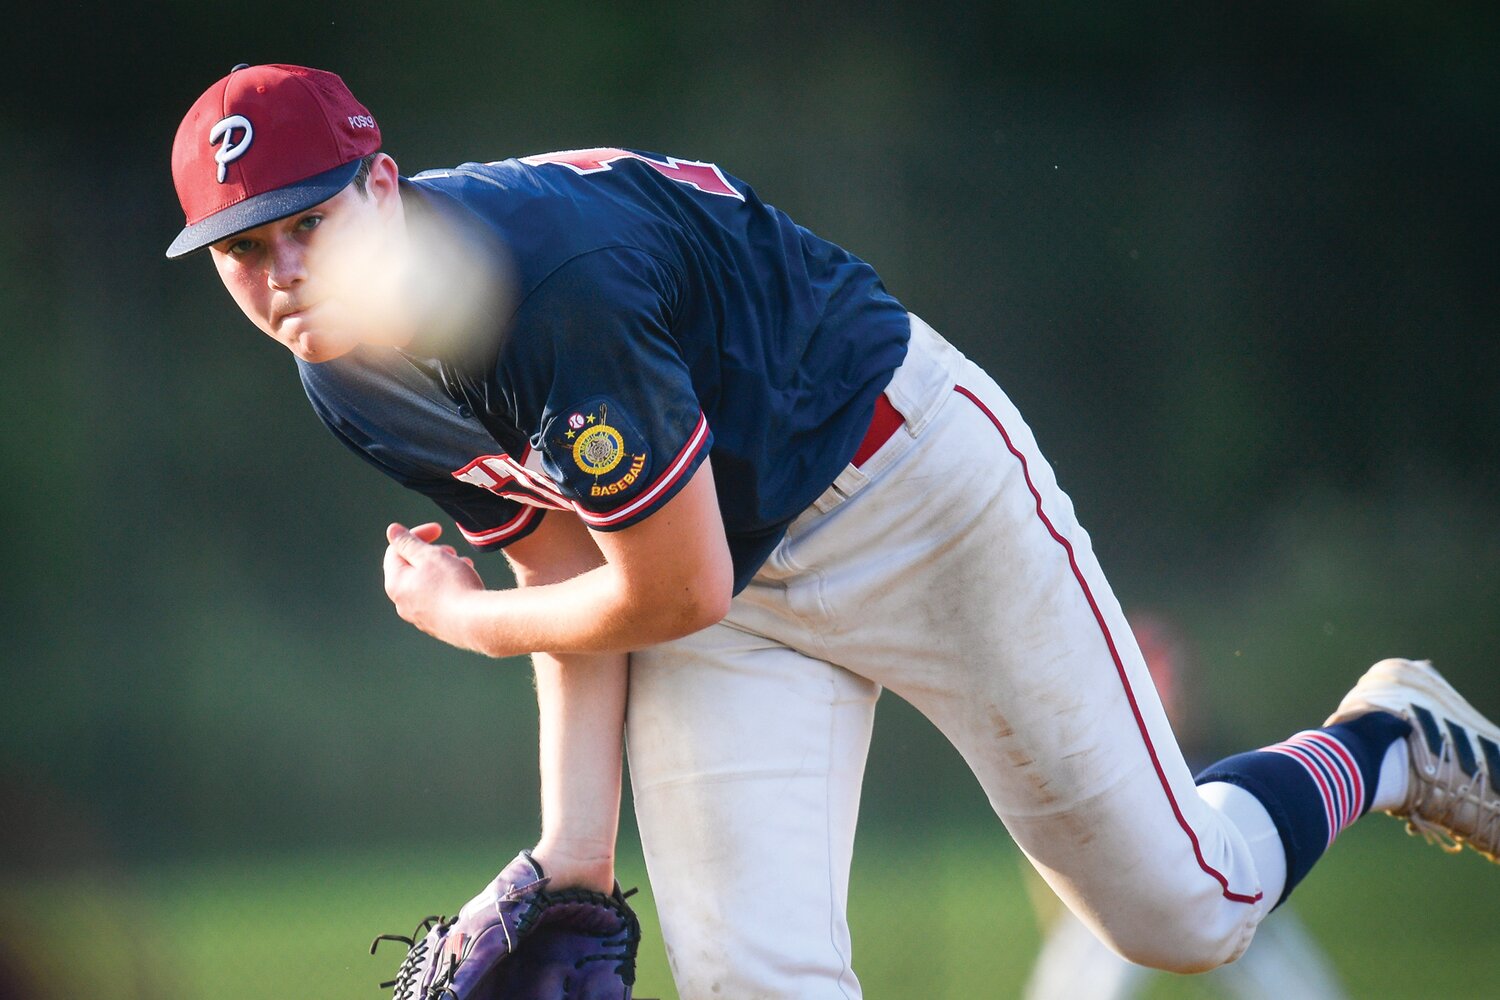 Plumstead’s Mike Wallbillich delivers a pitch during the fourth inning.